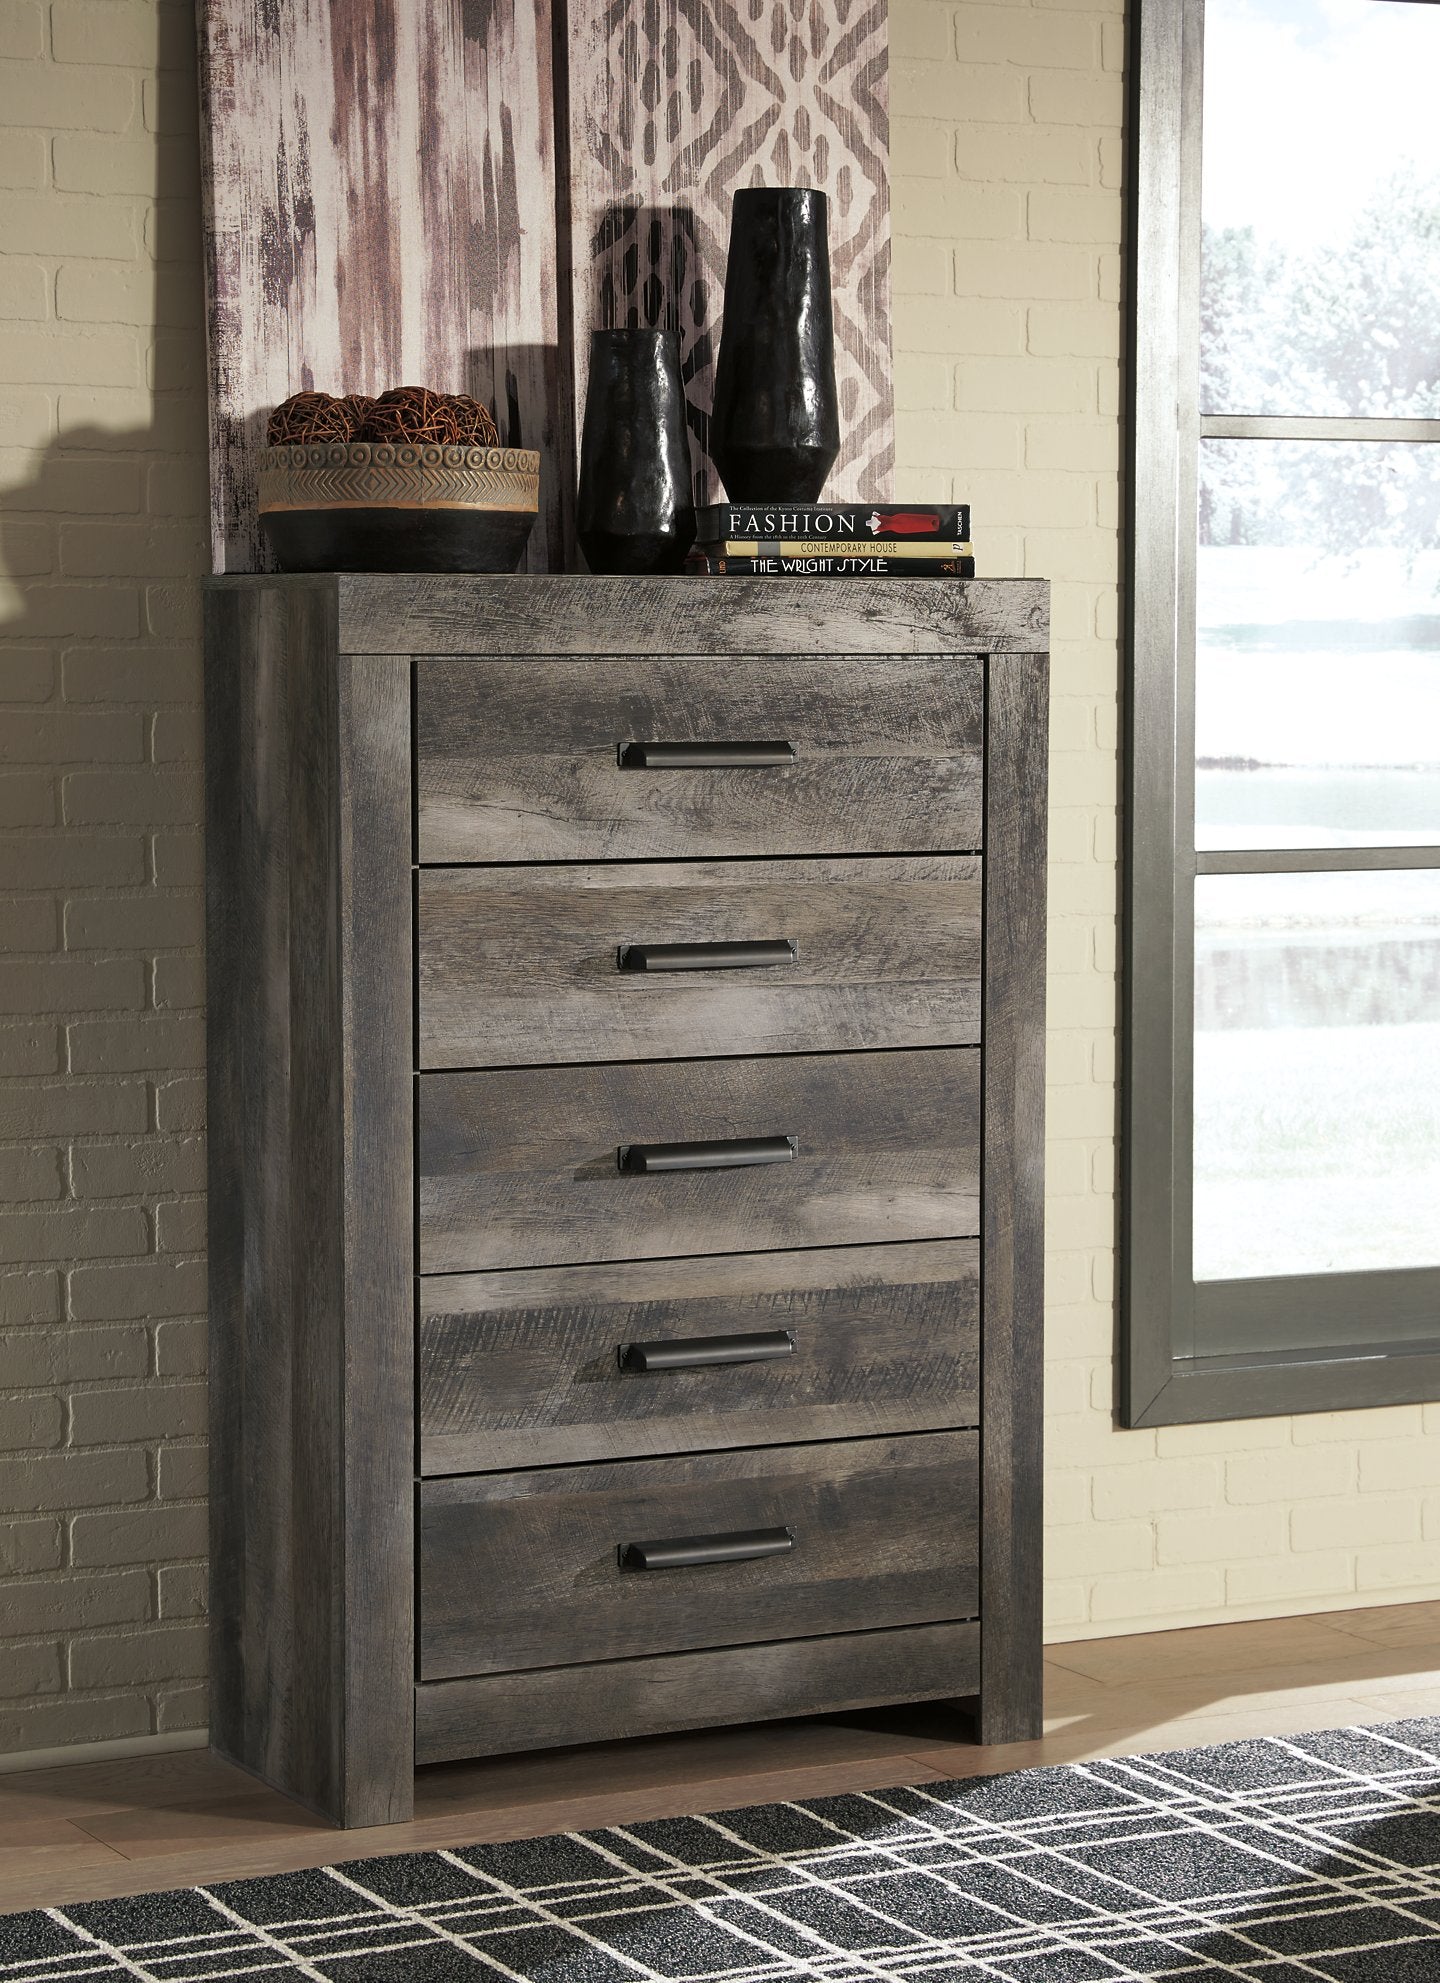 Wynnlow Chest of Drawers - Half Price Furniture